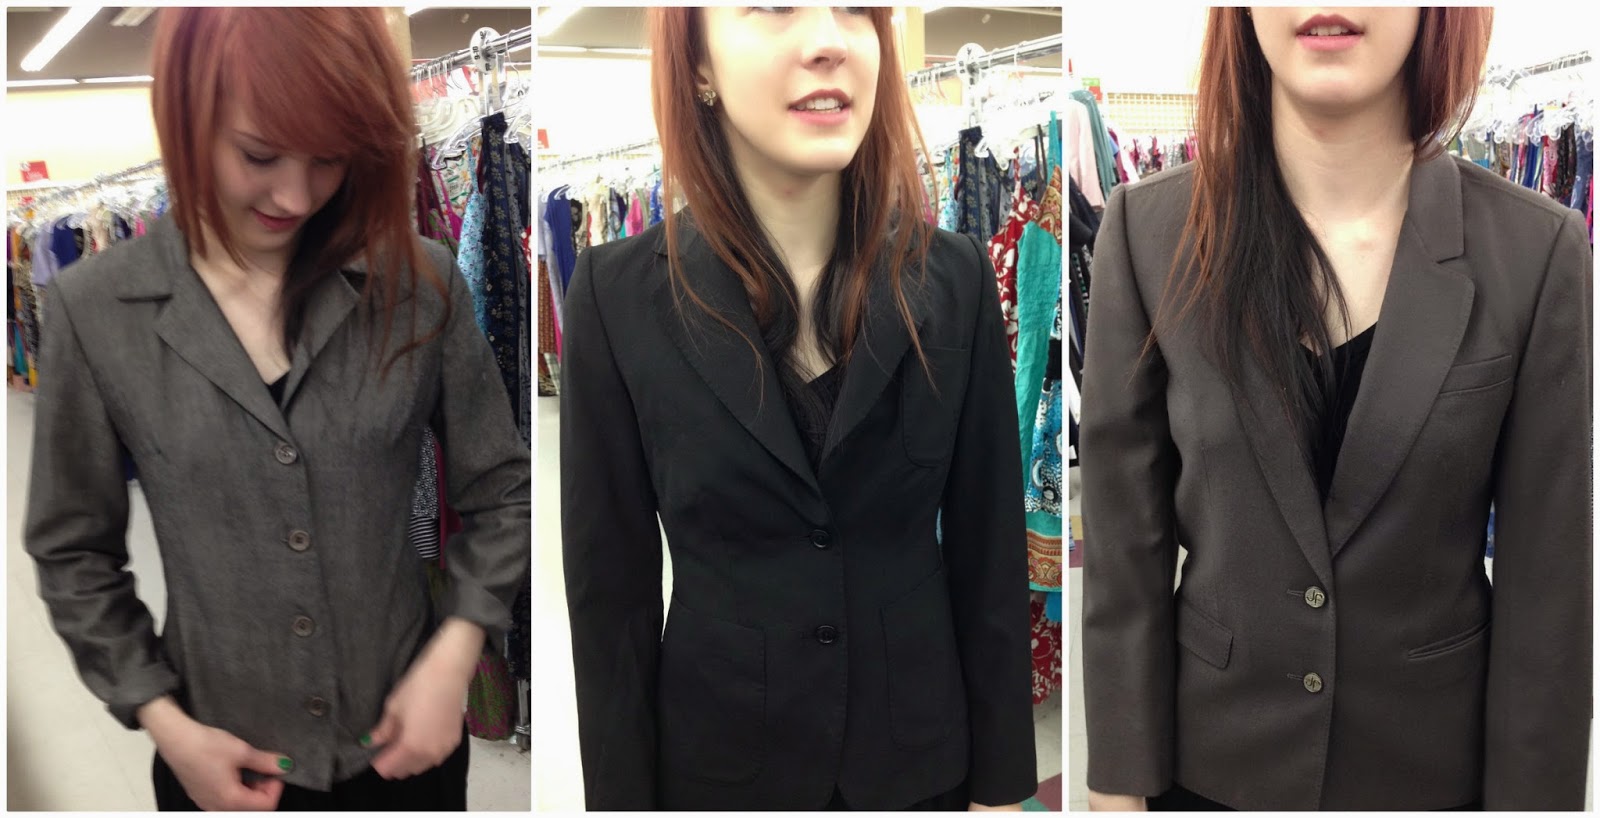 http://vvboutiquestyle.blogspot.ca/2014/05/thrifted-corporate-style.html